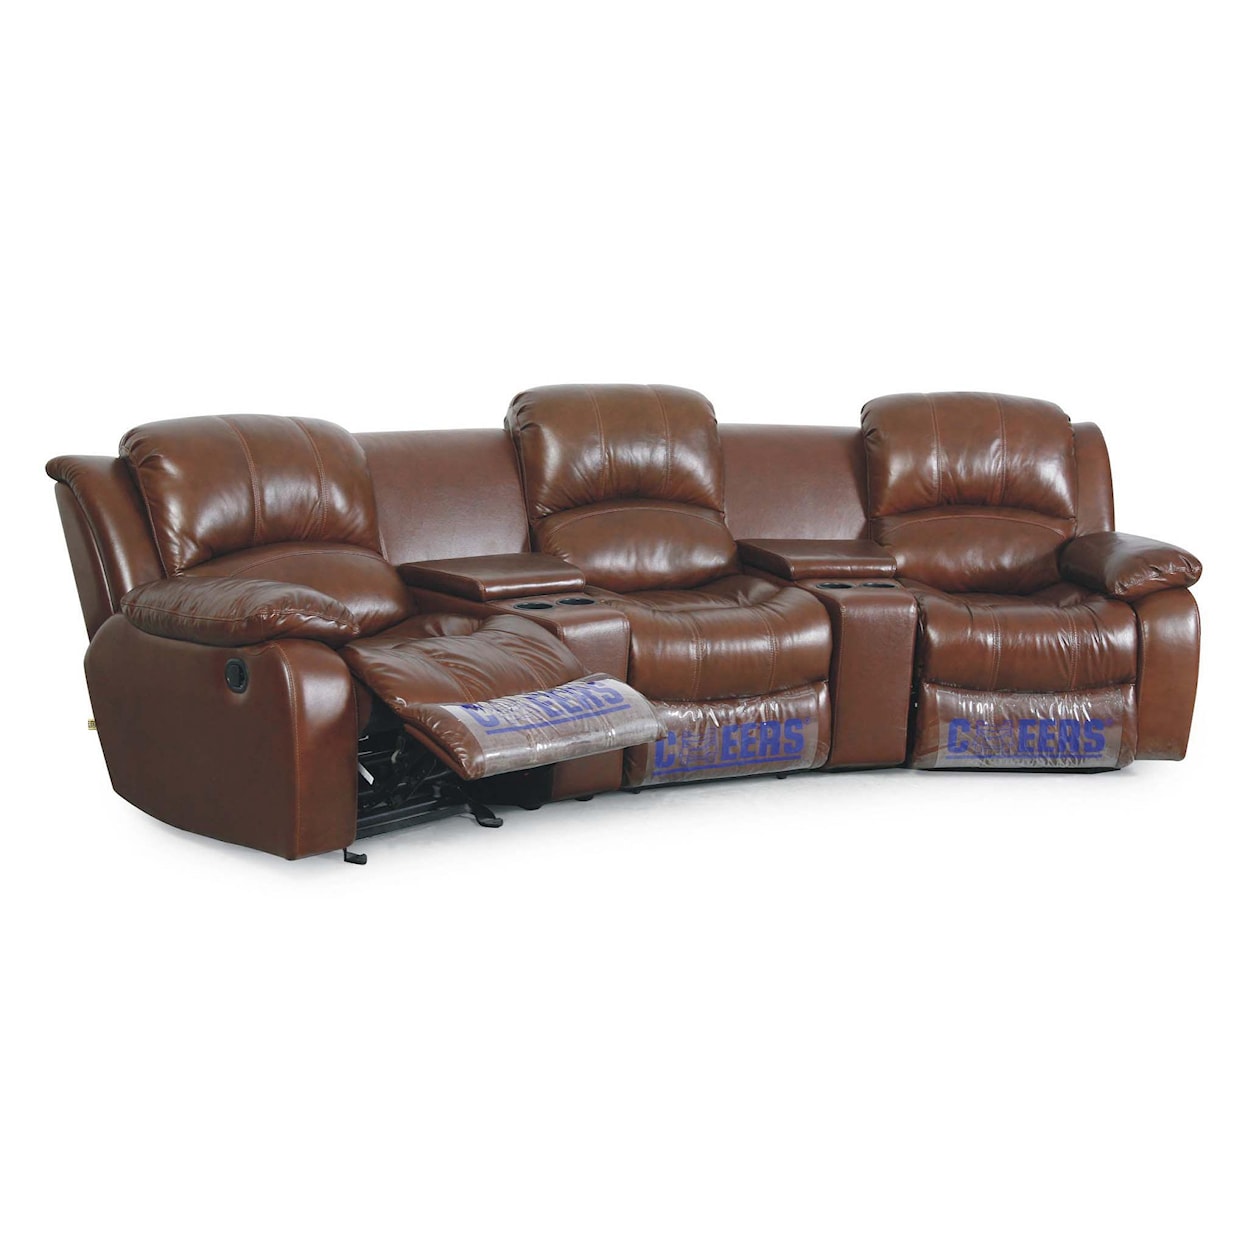 VFM Signature XW8251N 3-Person Leather Theater Seating